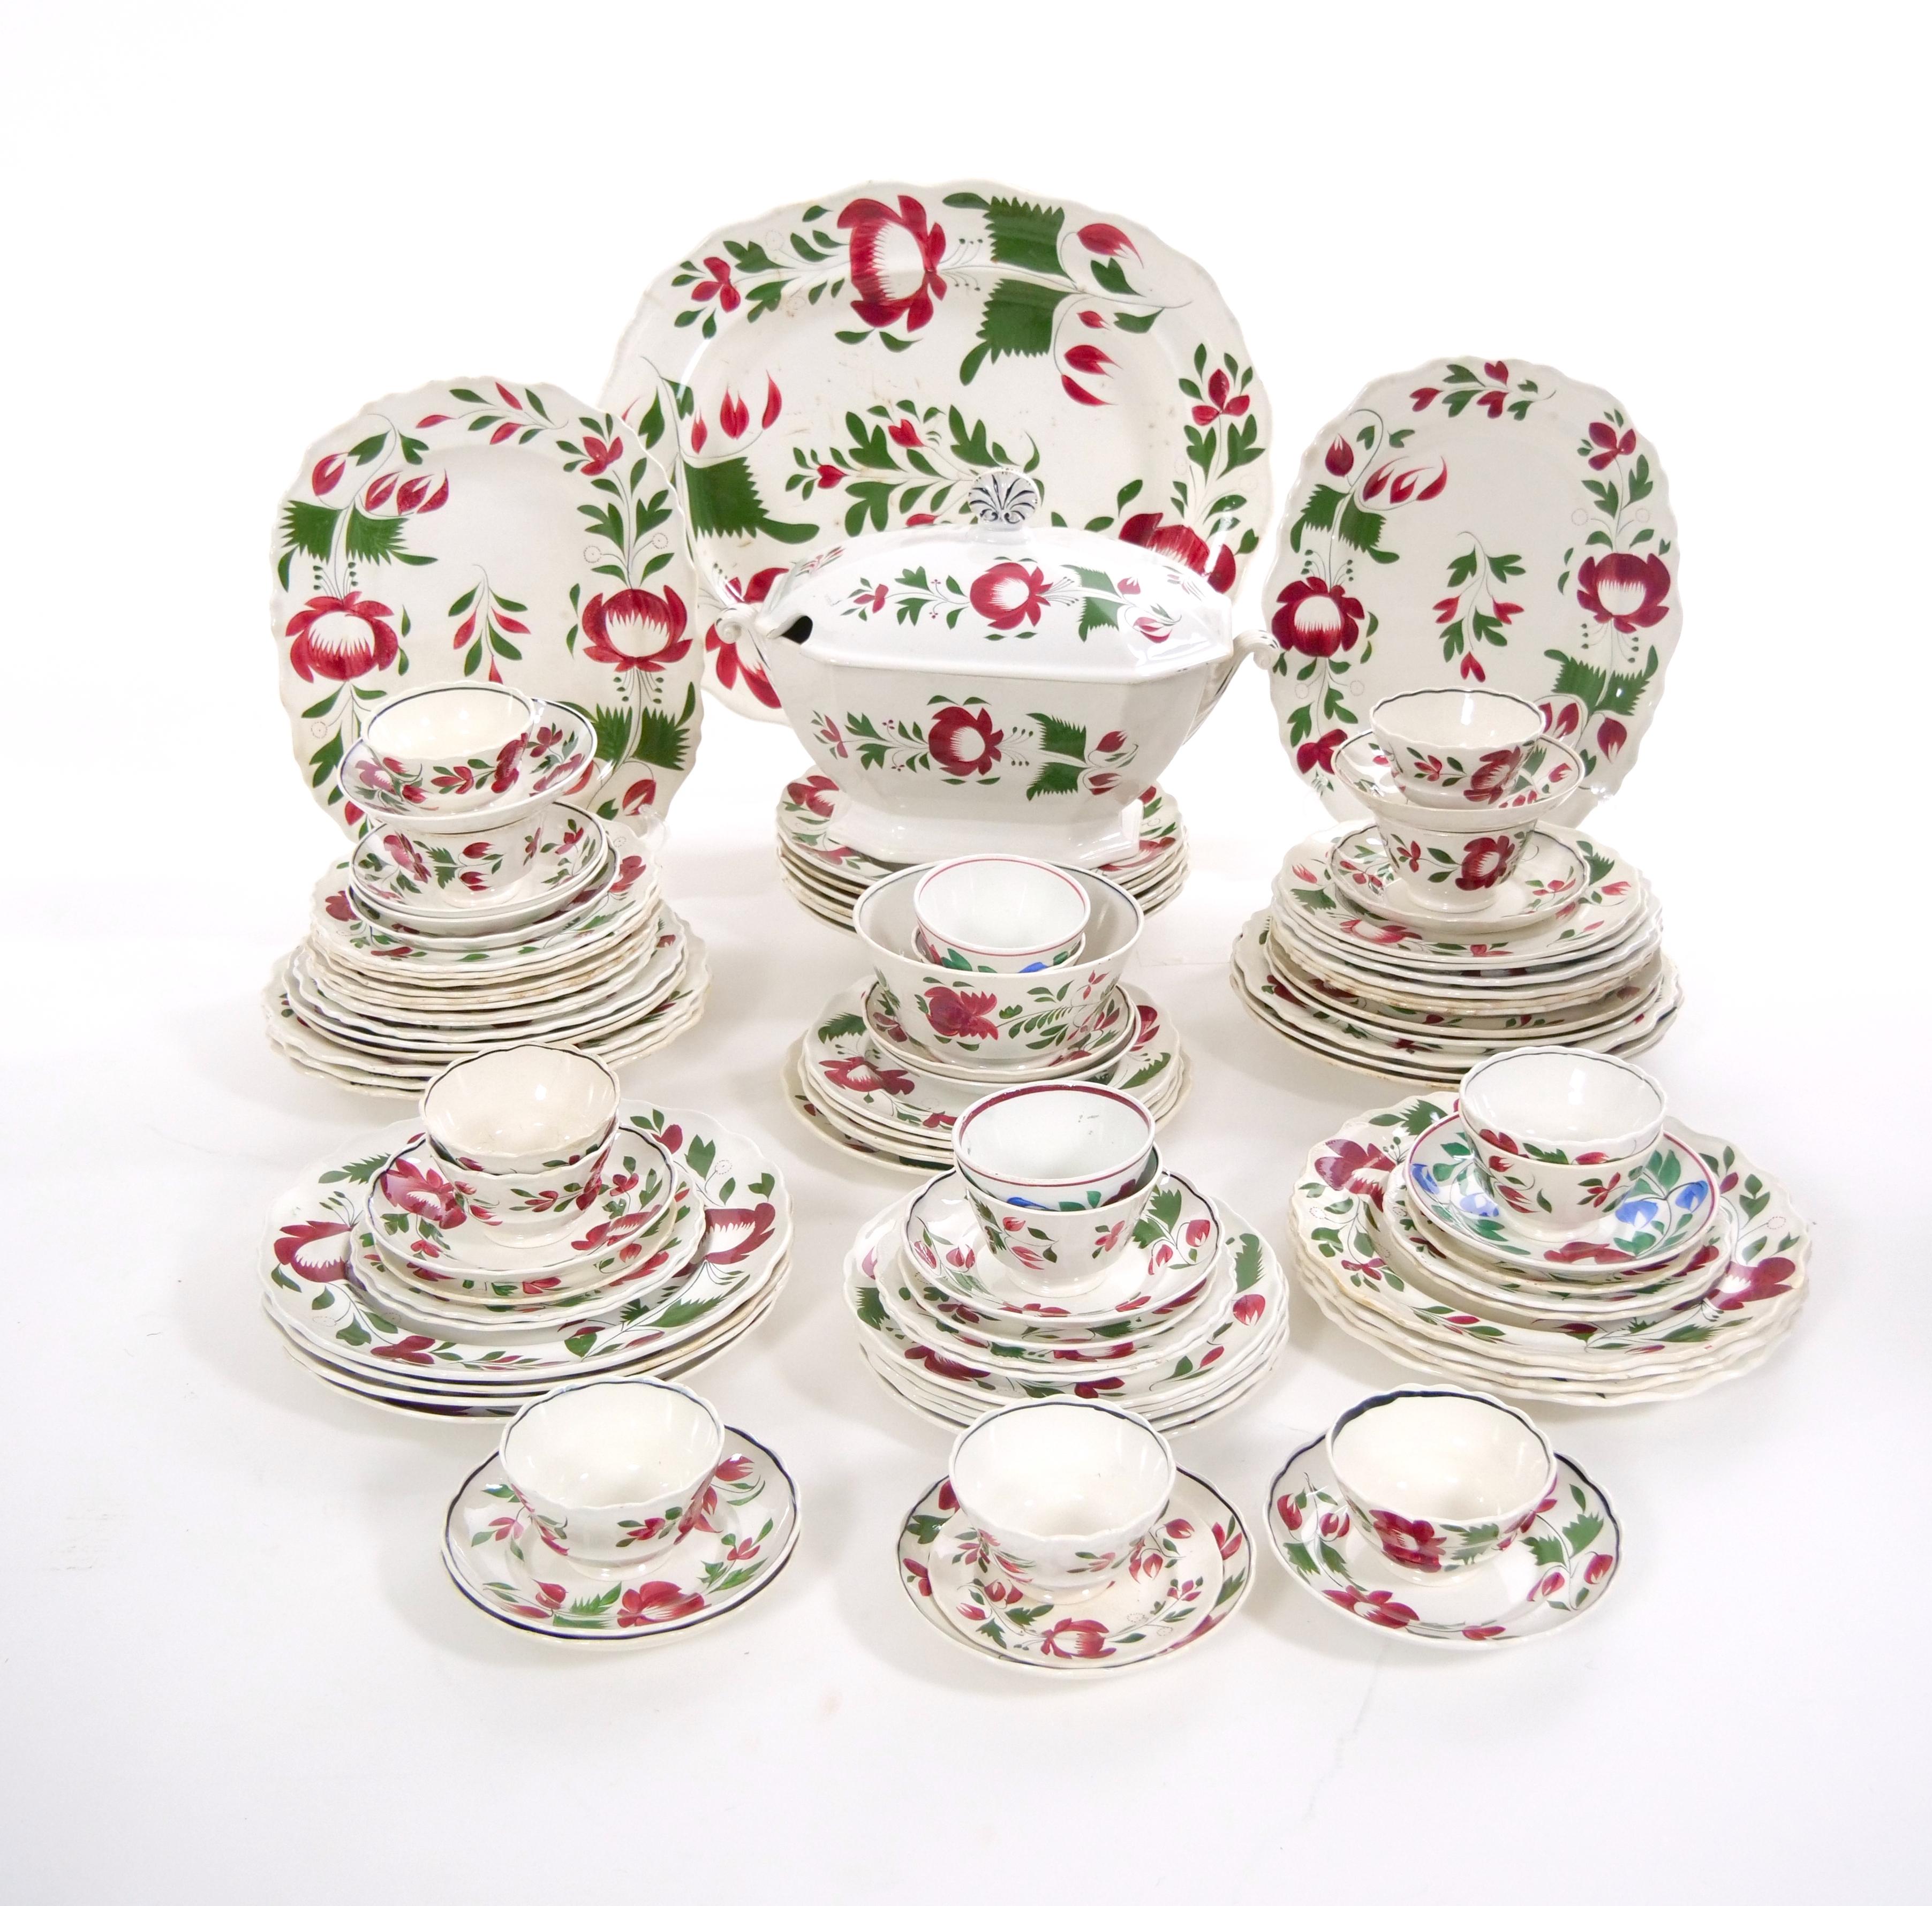 Indulge in timeless elegance with this exquisite mid-20th century American pottery by Adams Rose ironstone dinnerware service. This comprehensive set includes a variety of pieces to elevate your dining experience, perfect for entertaining or